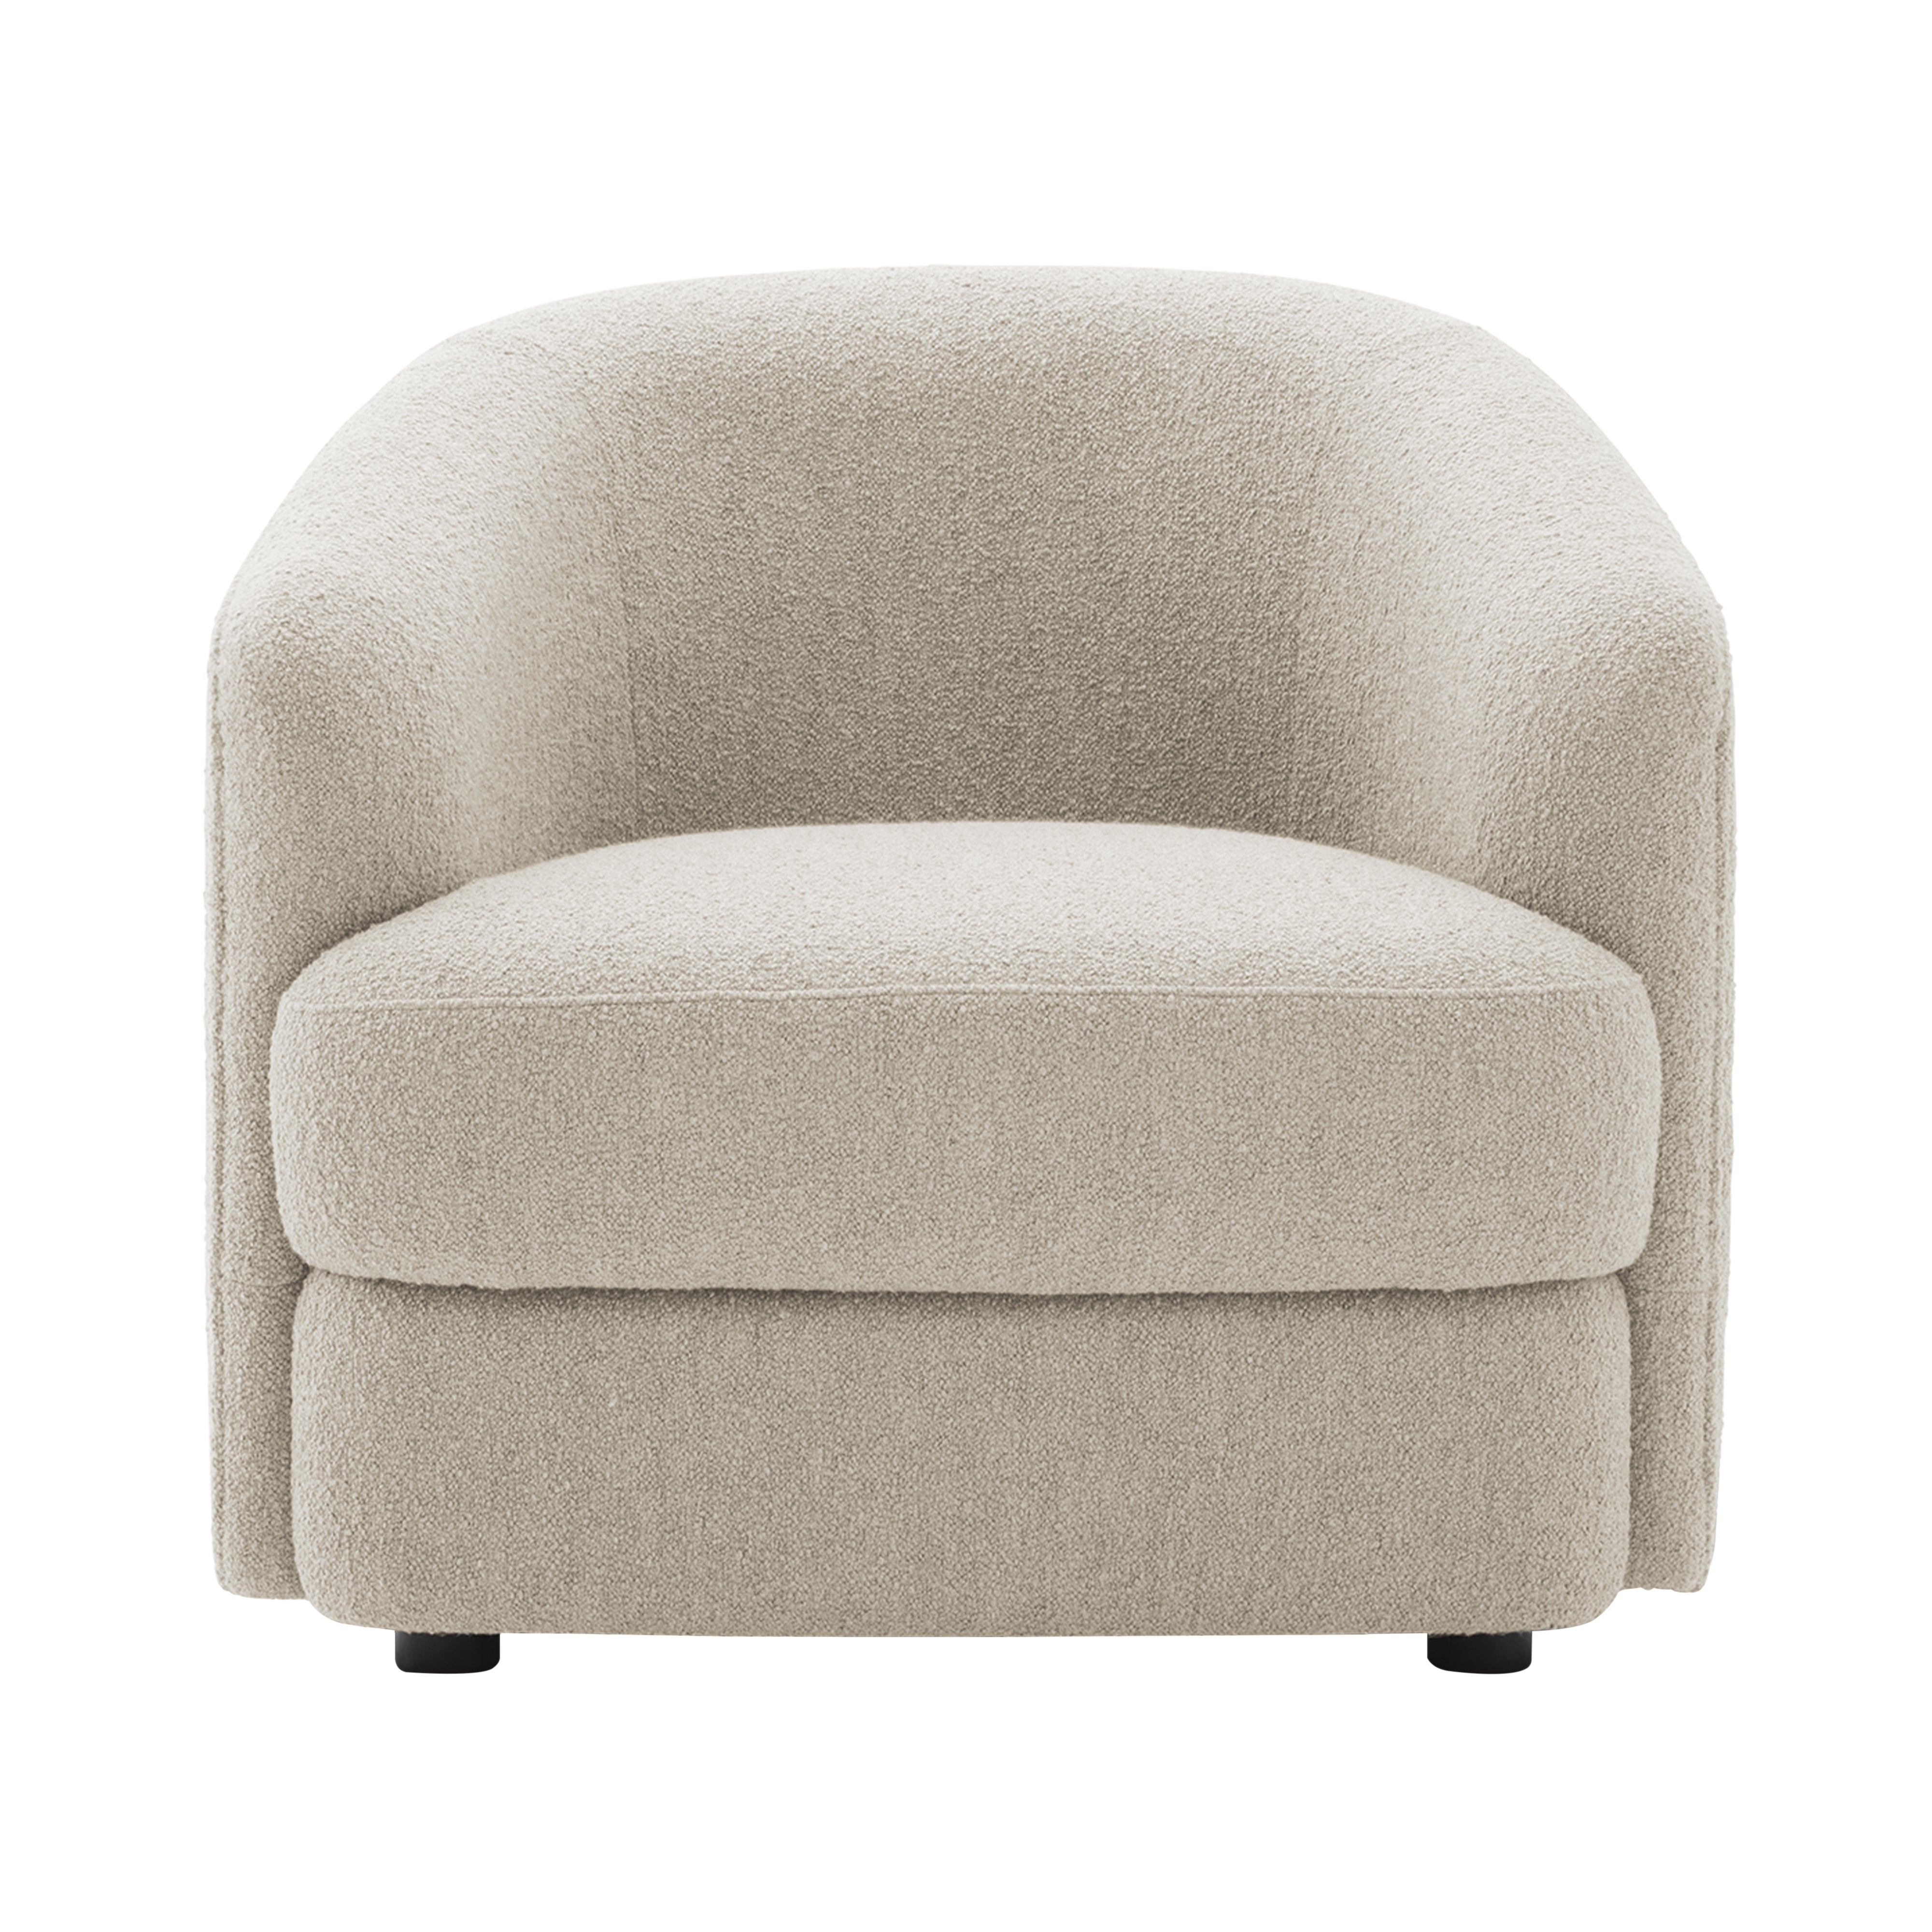 Covent Lounge Chair: Upholstered + Barnum Lana 24